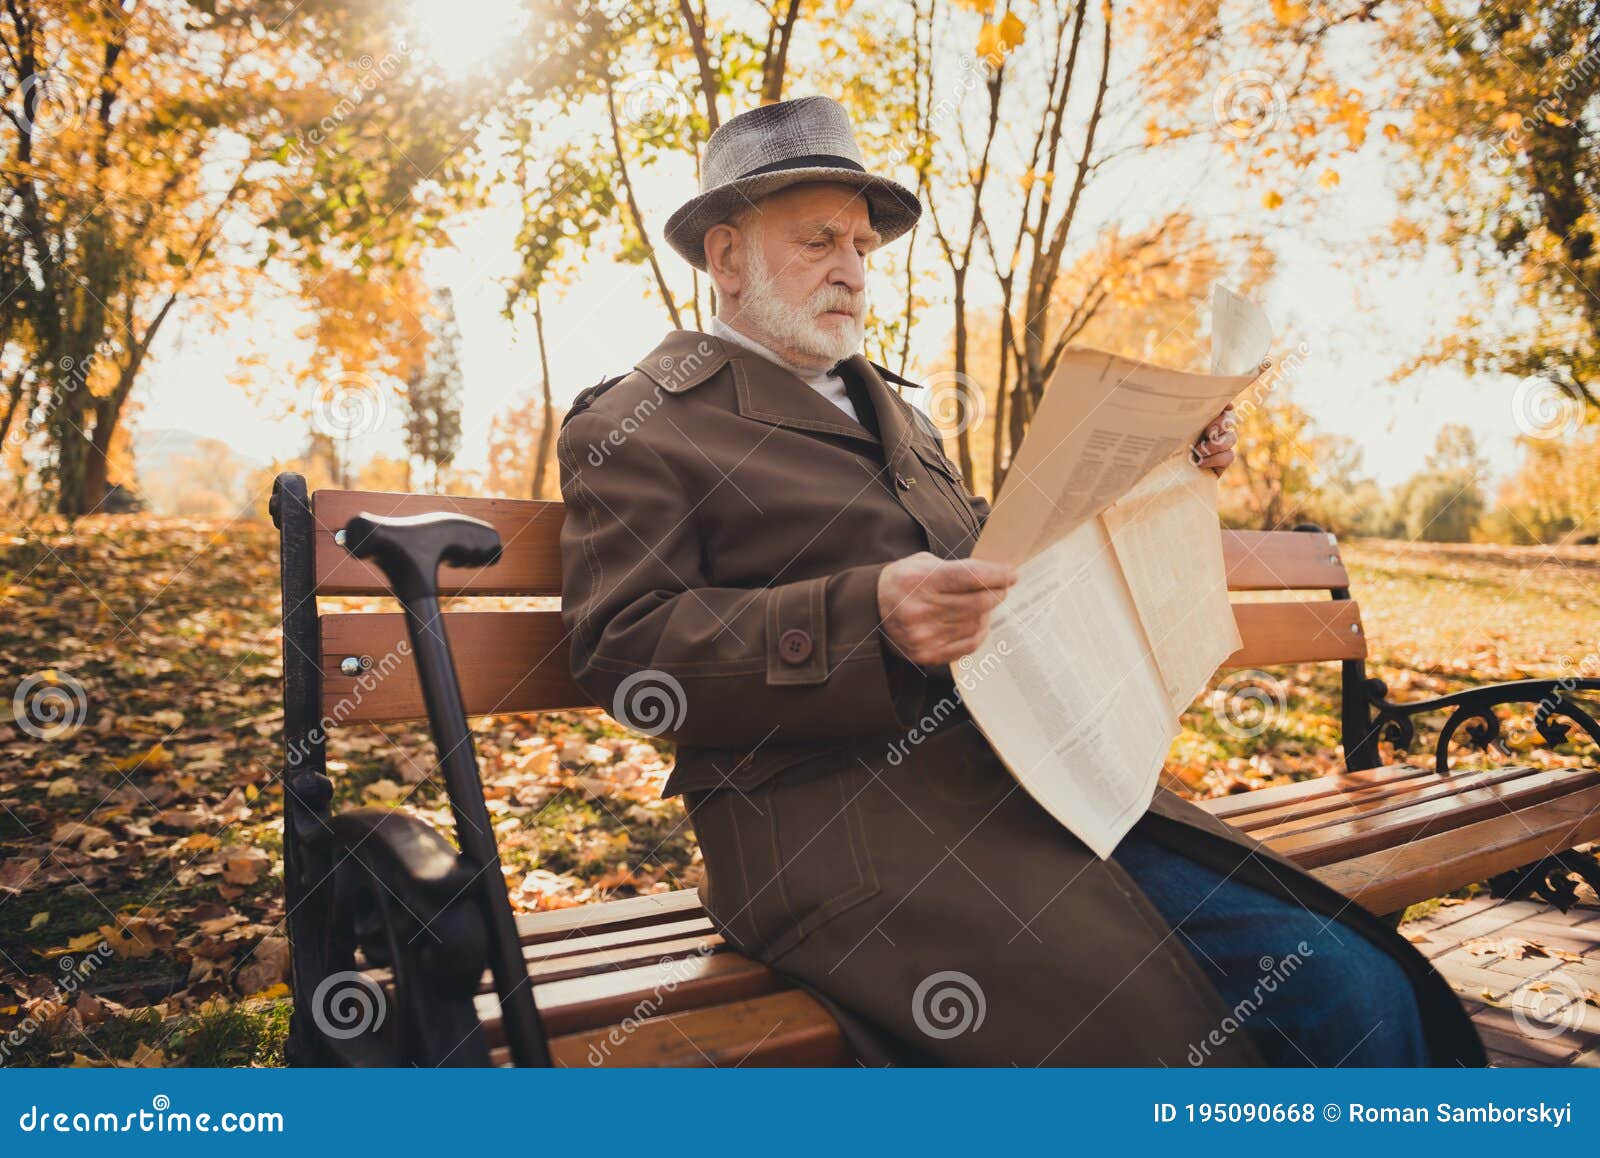 Photo Of Serious Smart Old Man Retired Professor Rest Relax City Center Fall Park Outdoors Sit Bench Read Newspaper Stock Photo - Image Of News, Relax: 195090668